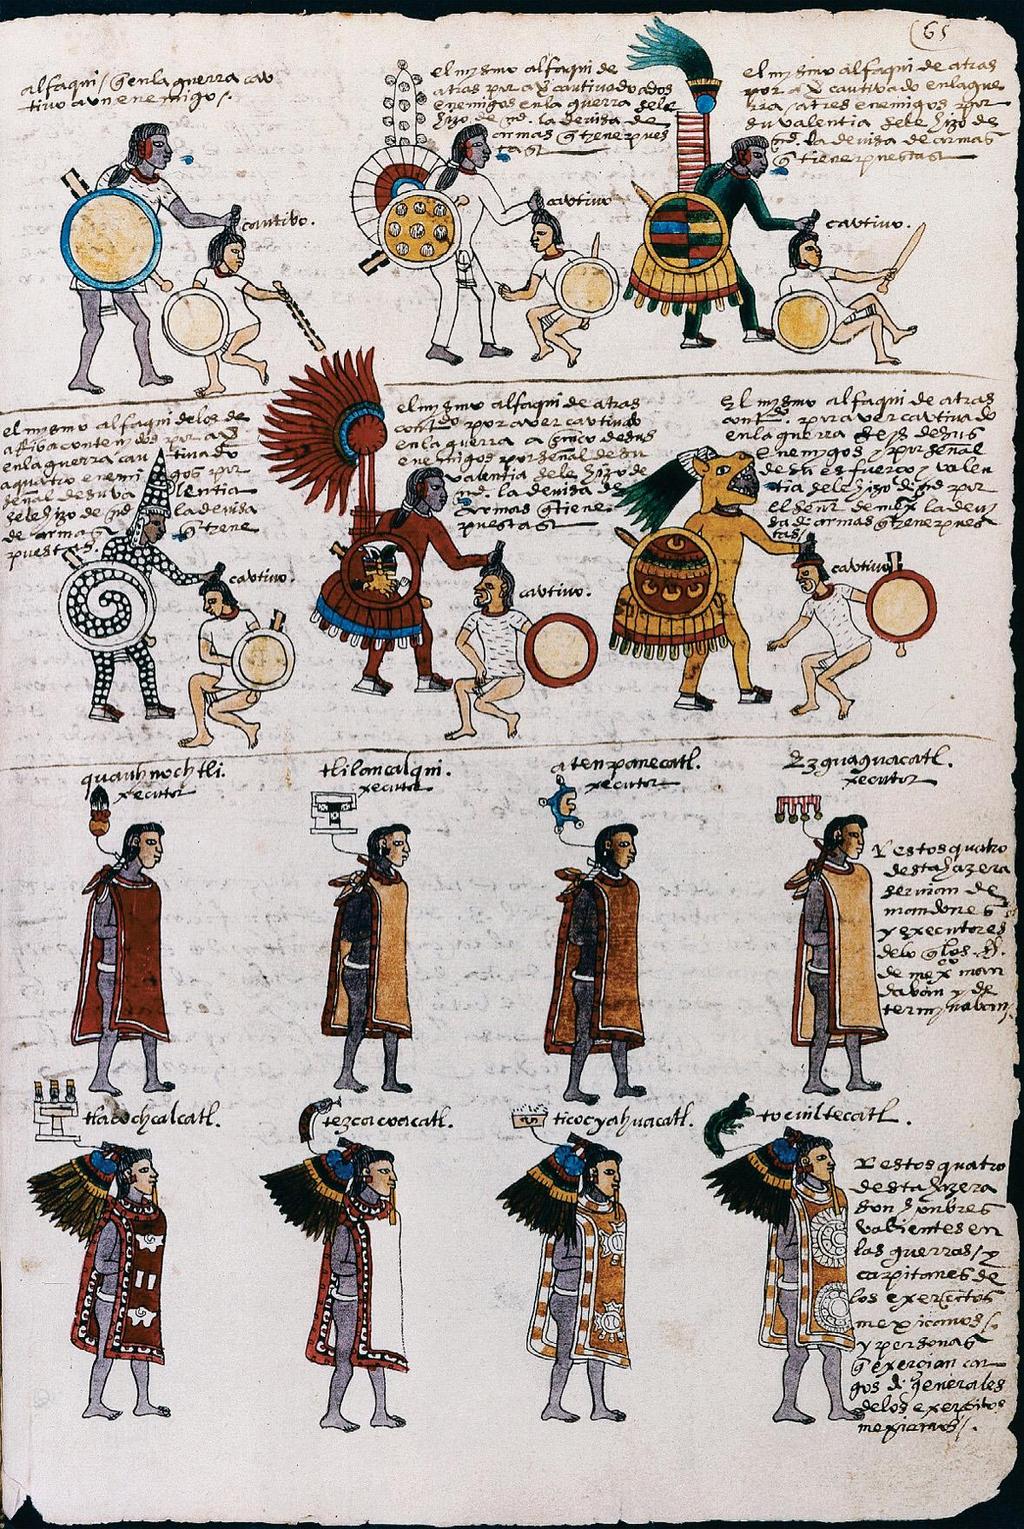 Figure 12.5 In the militarized society of the Aztec empire, warriors were organized into regiments and groups distinguished by their uniforms.